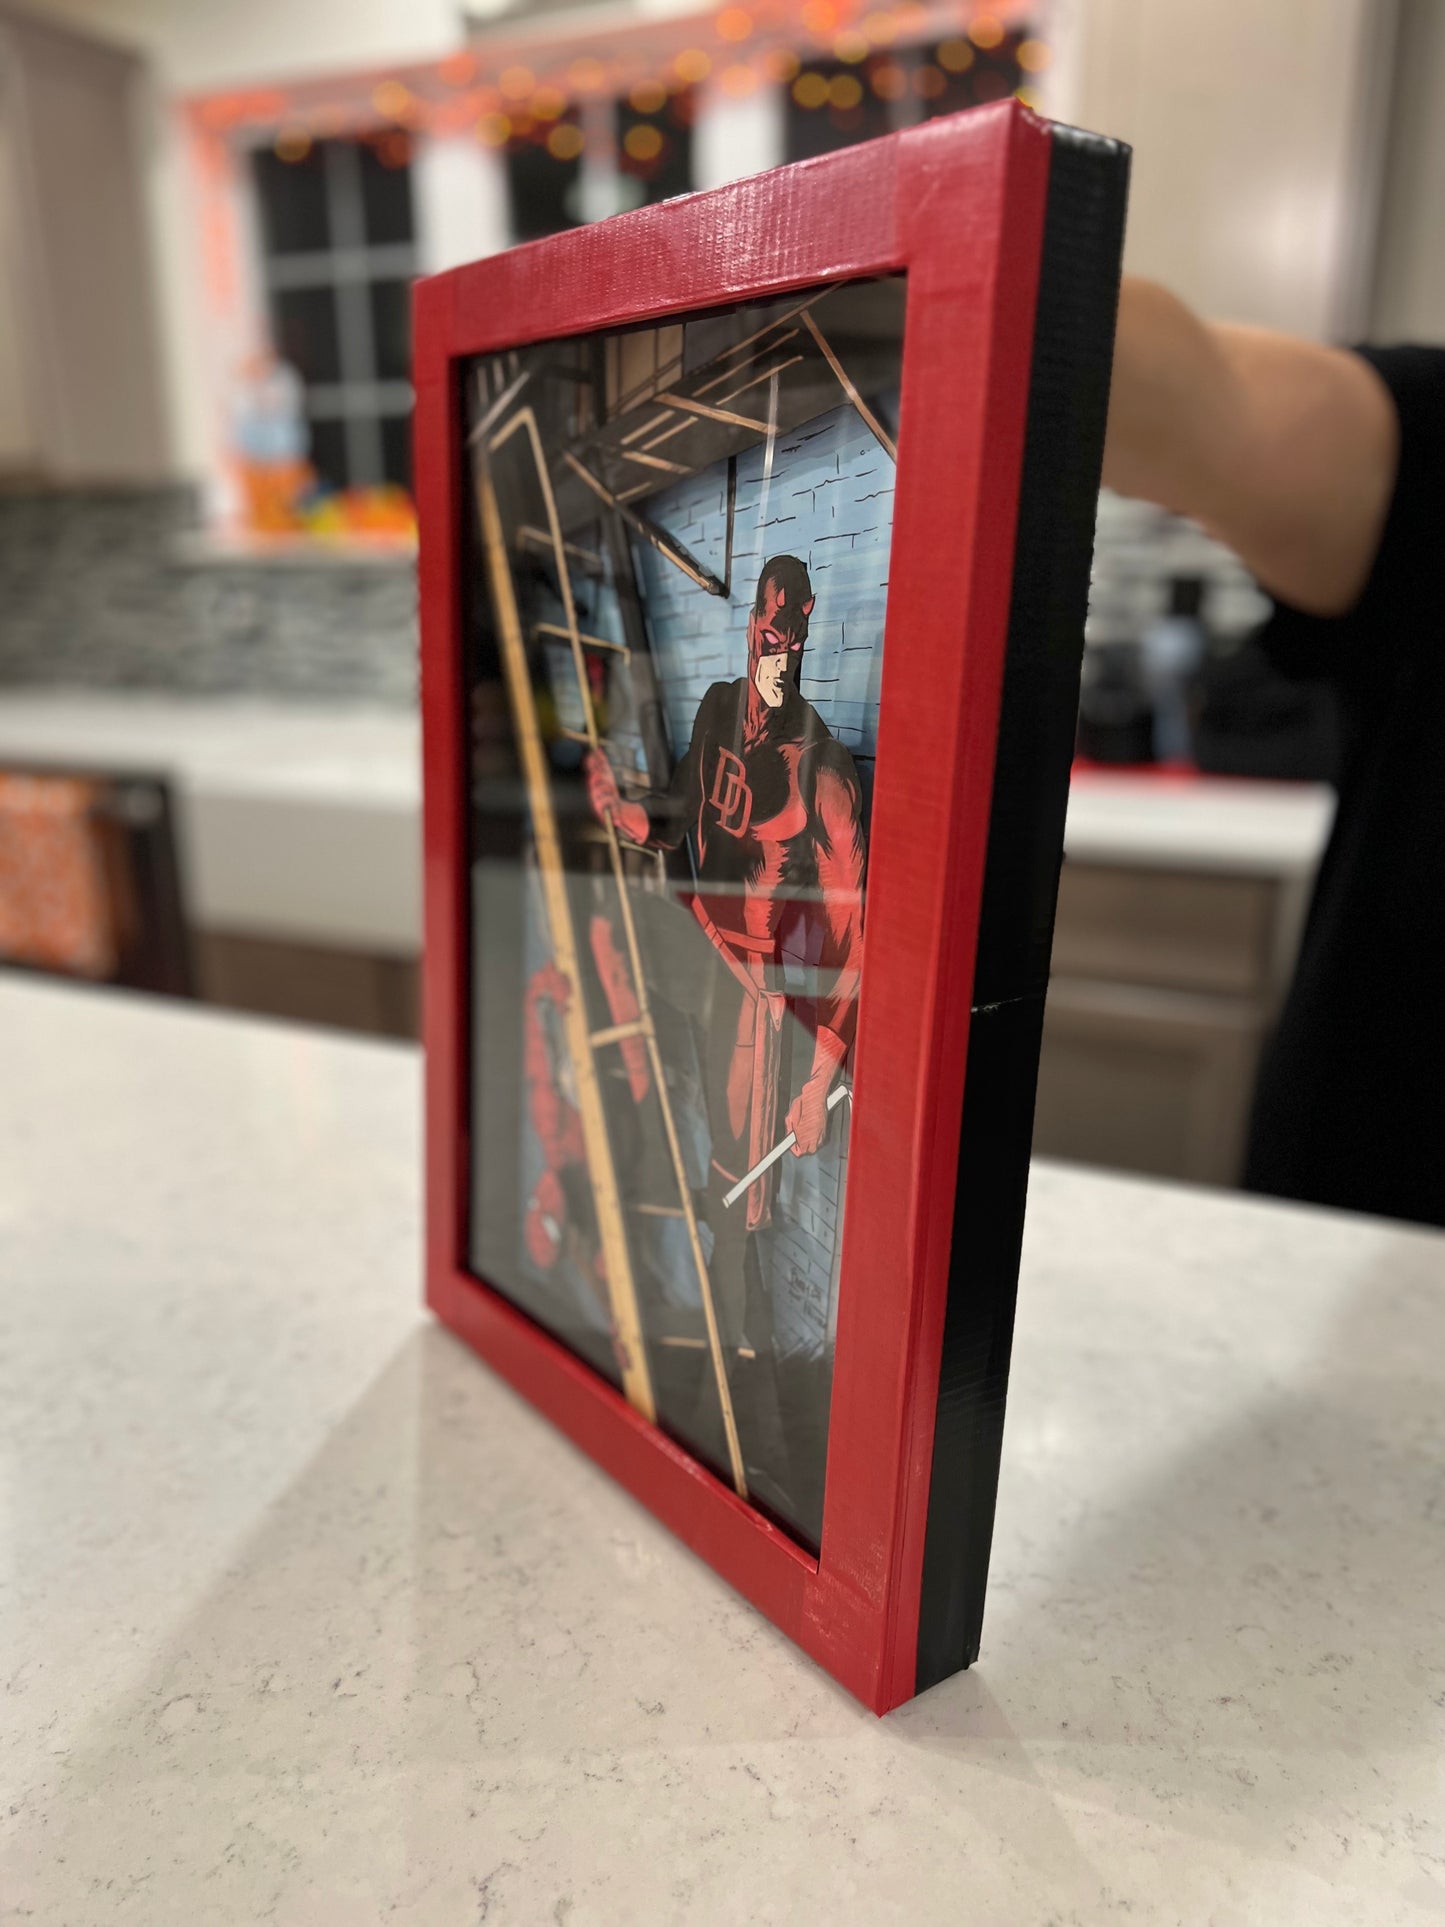 Daredevil & Spider-Man: Shadows by Barry Mlodossich (A One of a Kind Shadowbox Art)